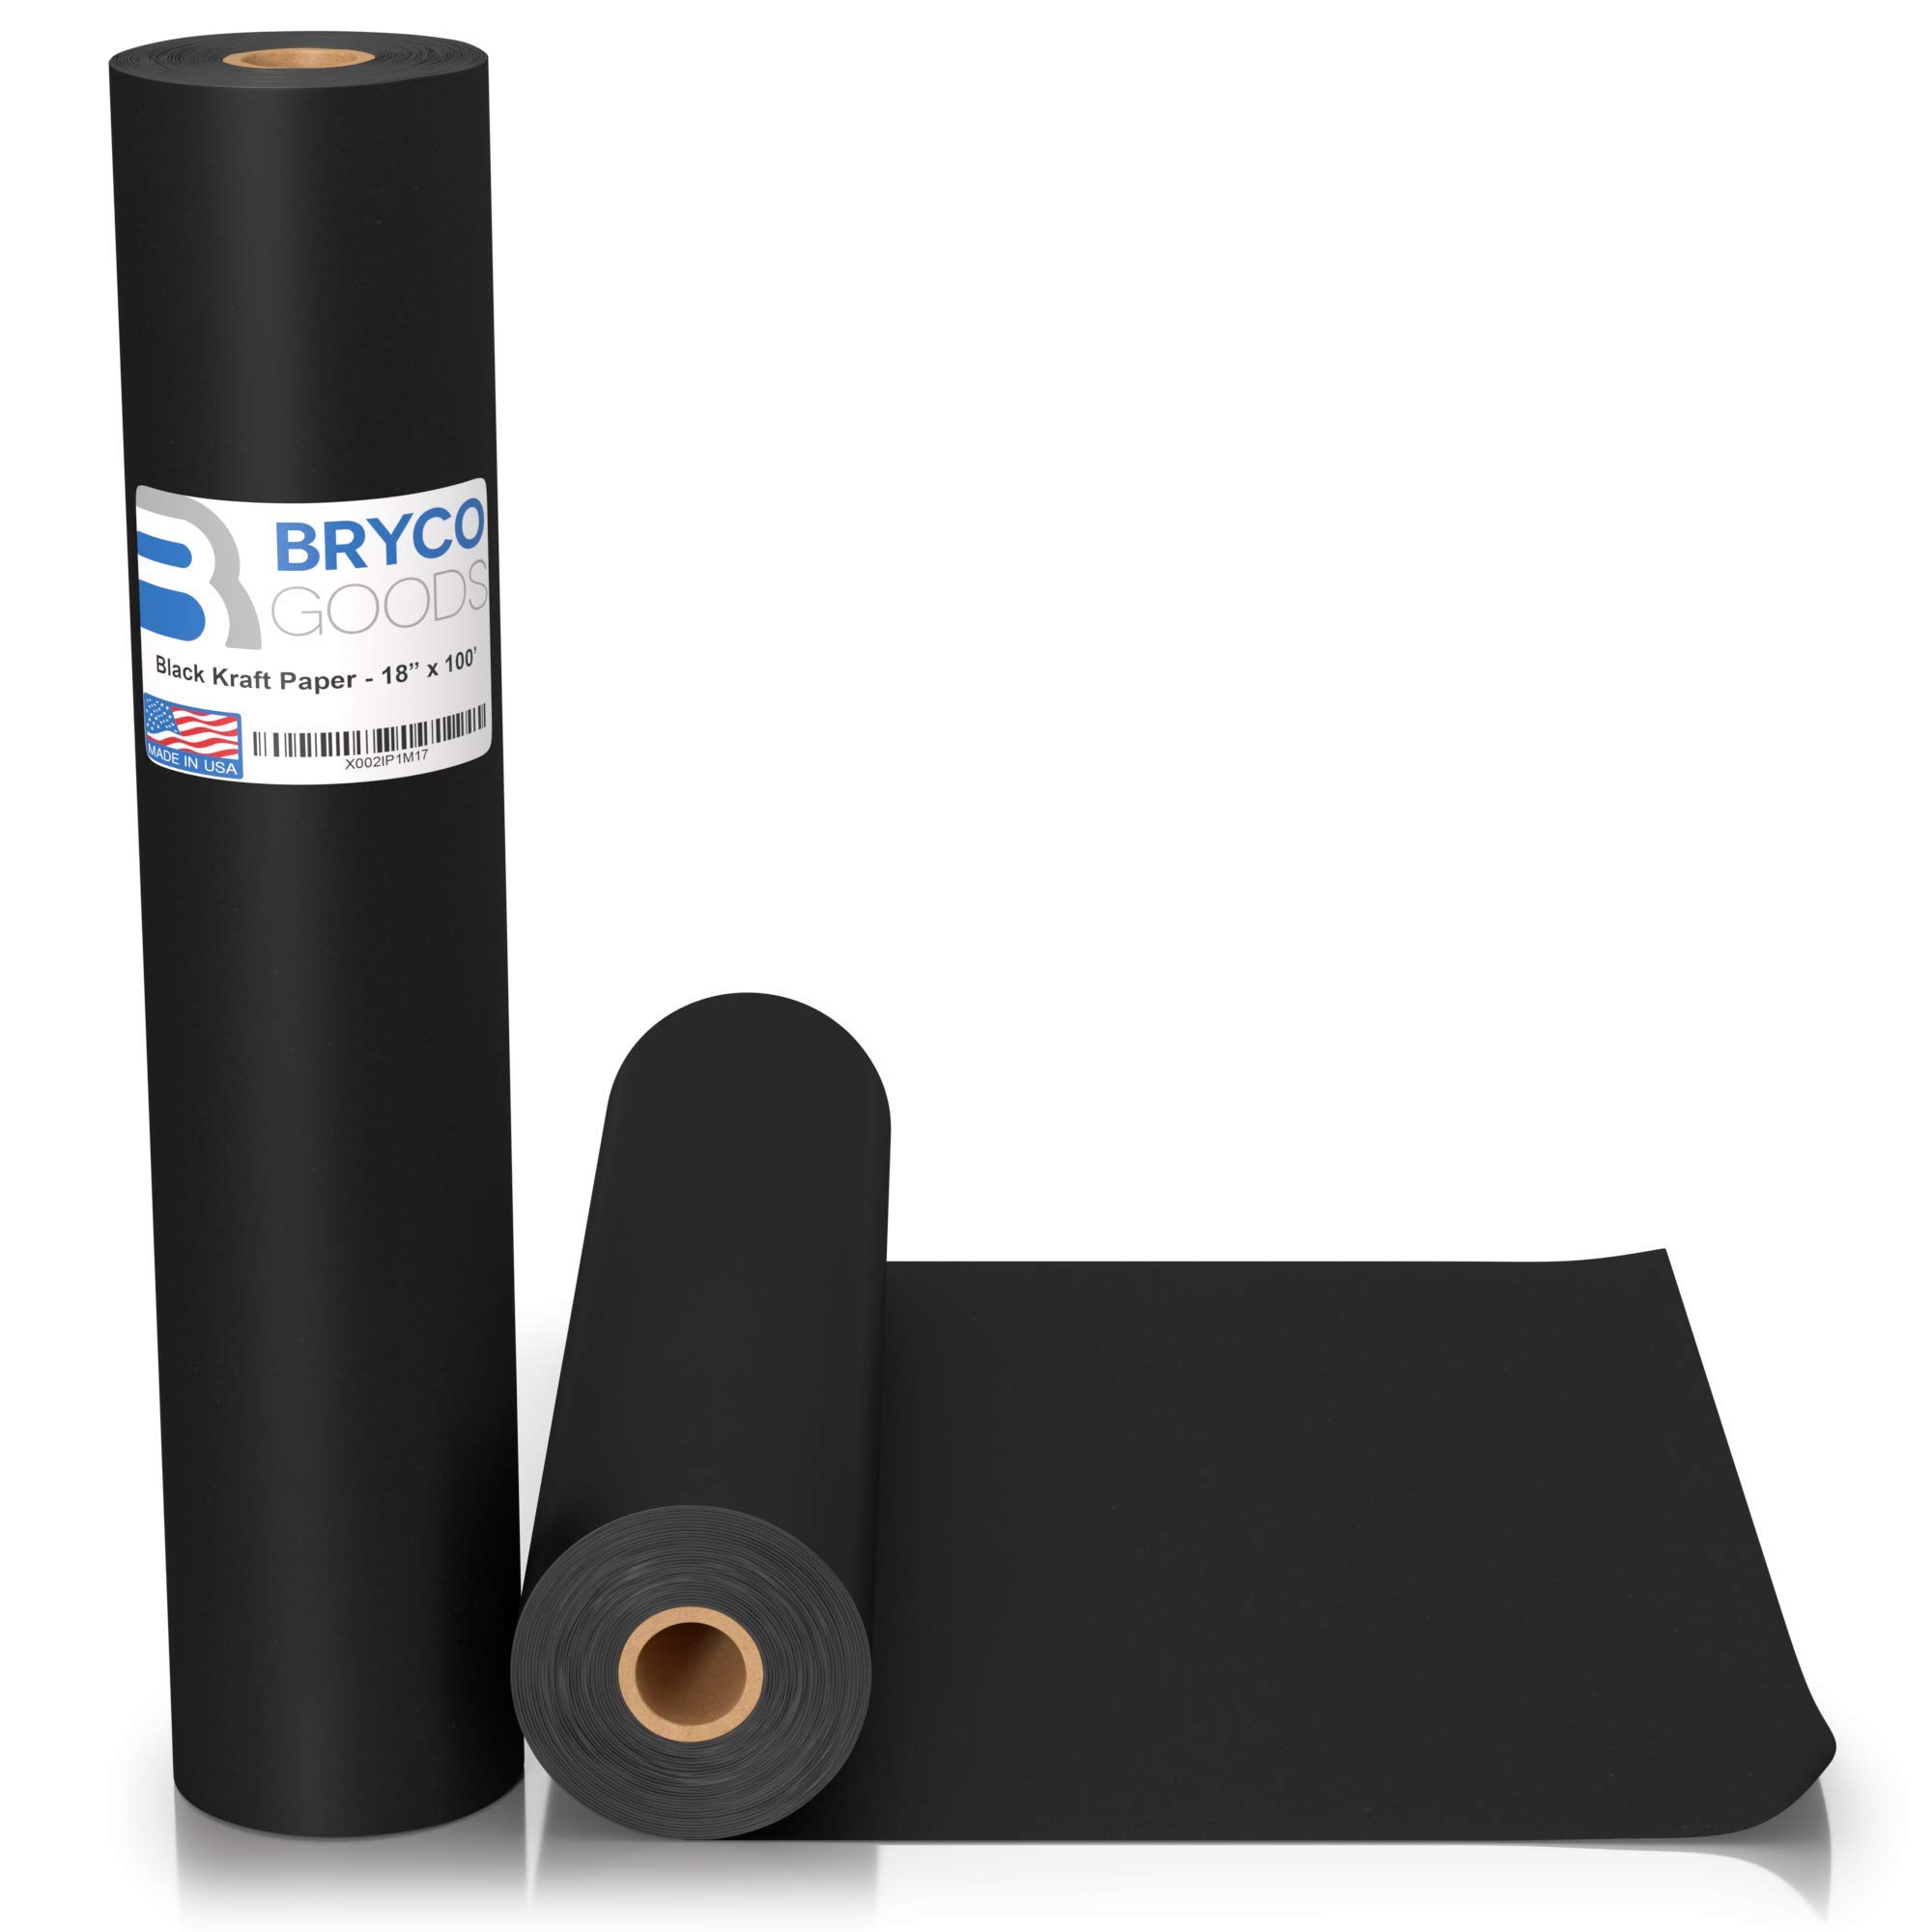  IDL Packaging Black Kraft Paper Roll 36 x 700', Both-Sided,  Fade-Resistant, Made in The USA, Thick 45 lbs (Pack of 1) - Colored Paper  for Kids Crafts, Art, Painting, Party Decor